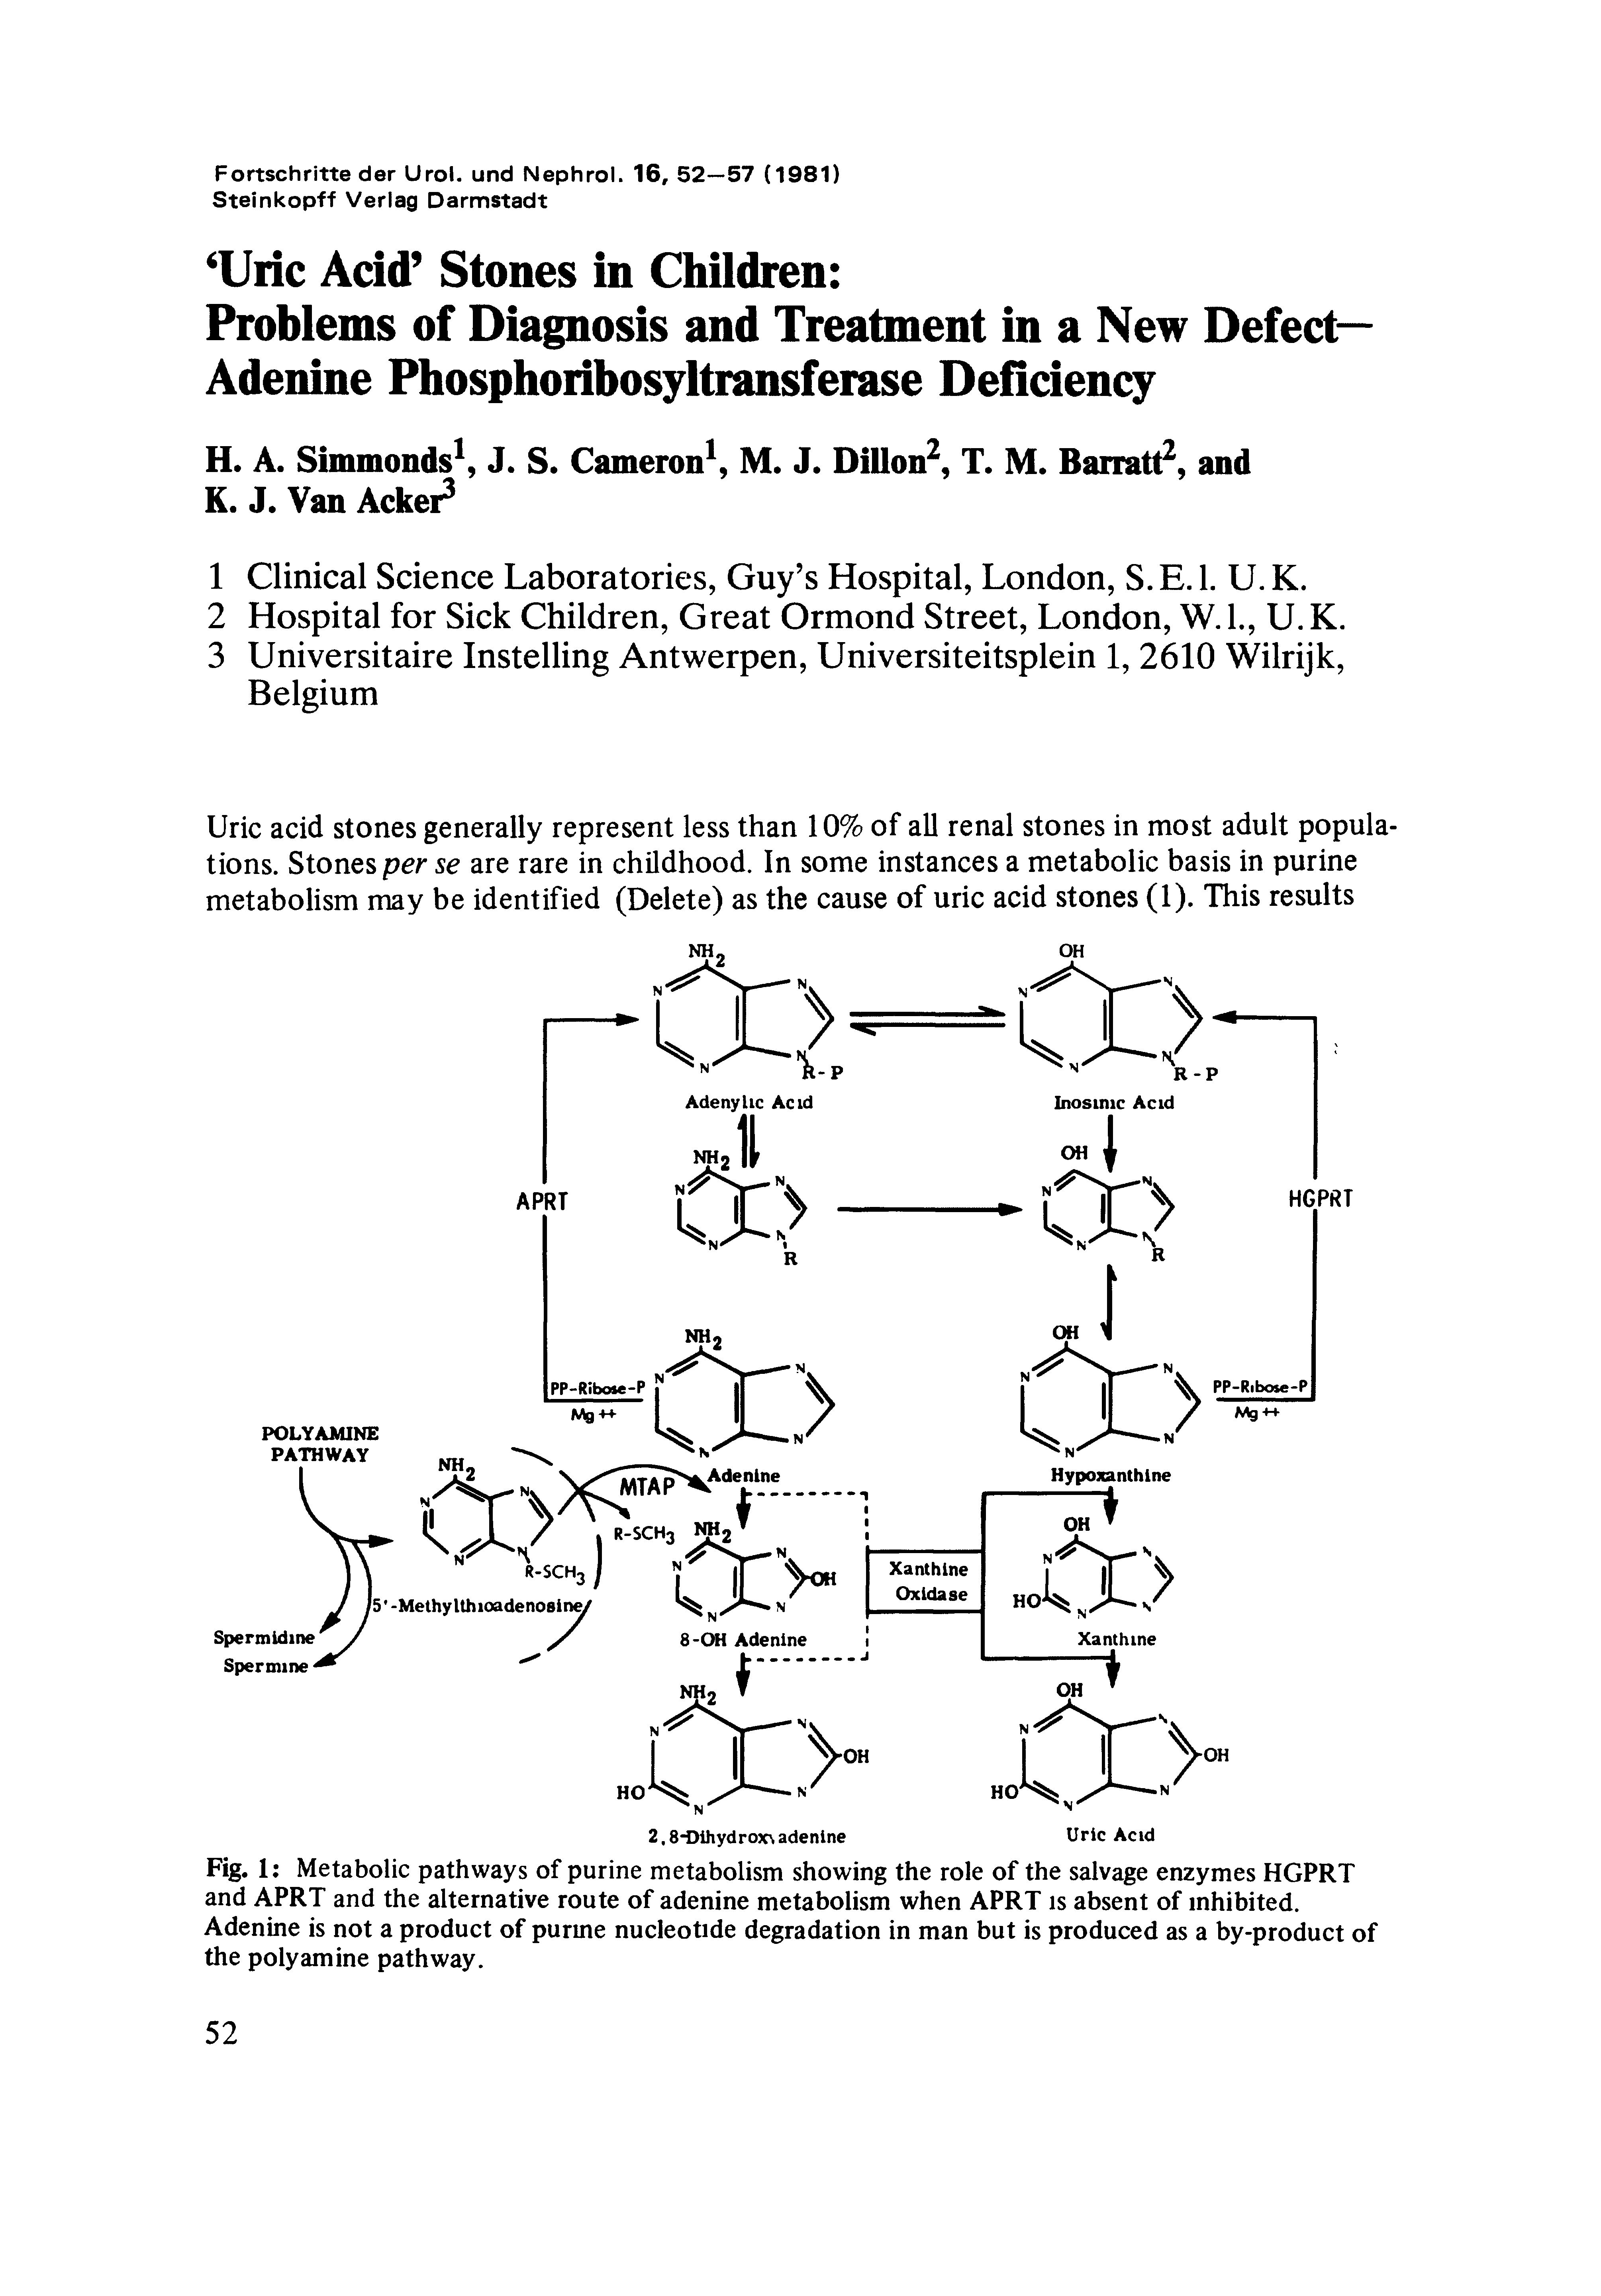 Fig. 1 Metabolic pathways of purine metabolism showing the role of the salvage enzymes HGPRT and APRT and the alternative route of adenine metabolism when APRT is absent of inhibited. Adenine is not a product of purme nucleotide degradation in man but is produced as a by-product of the poly amine pathway.